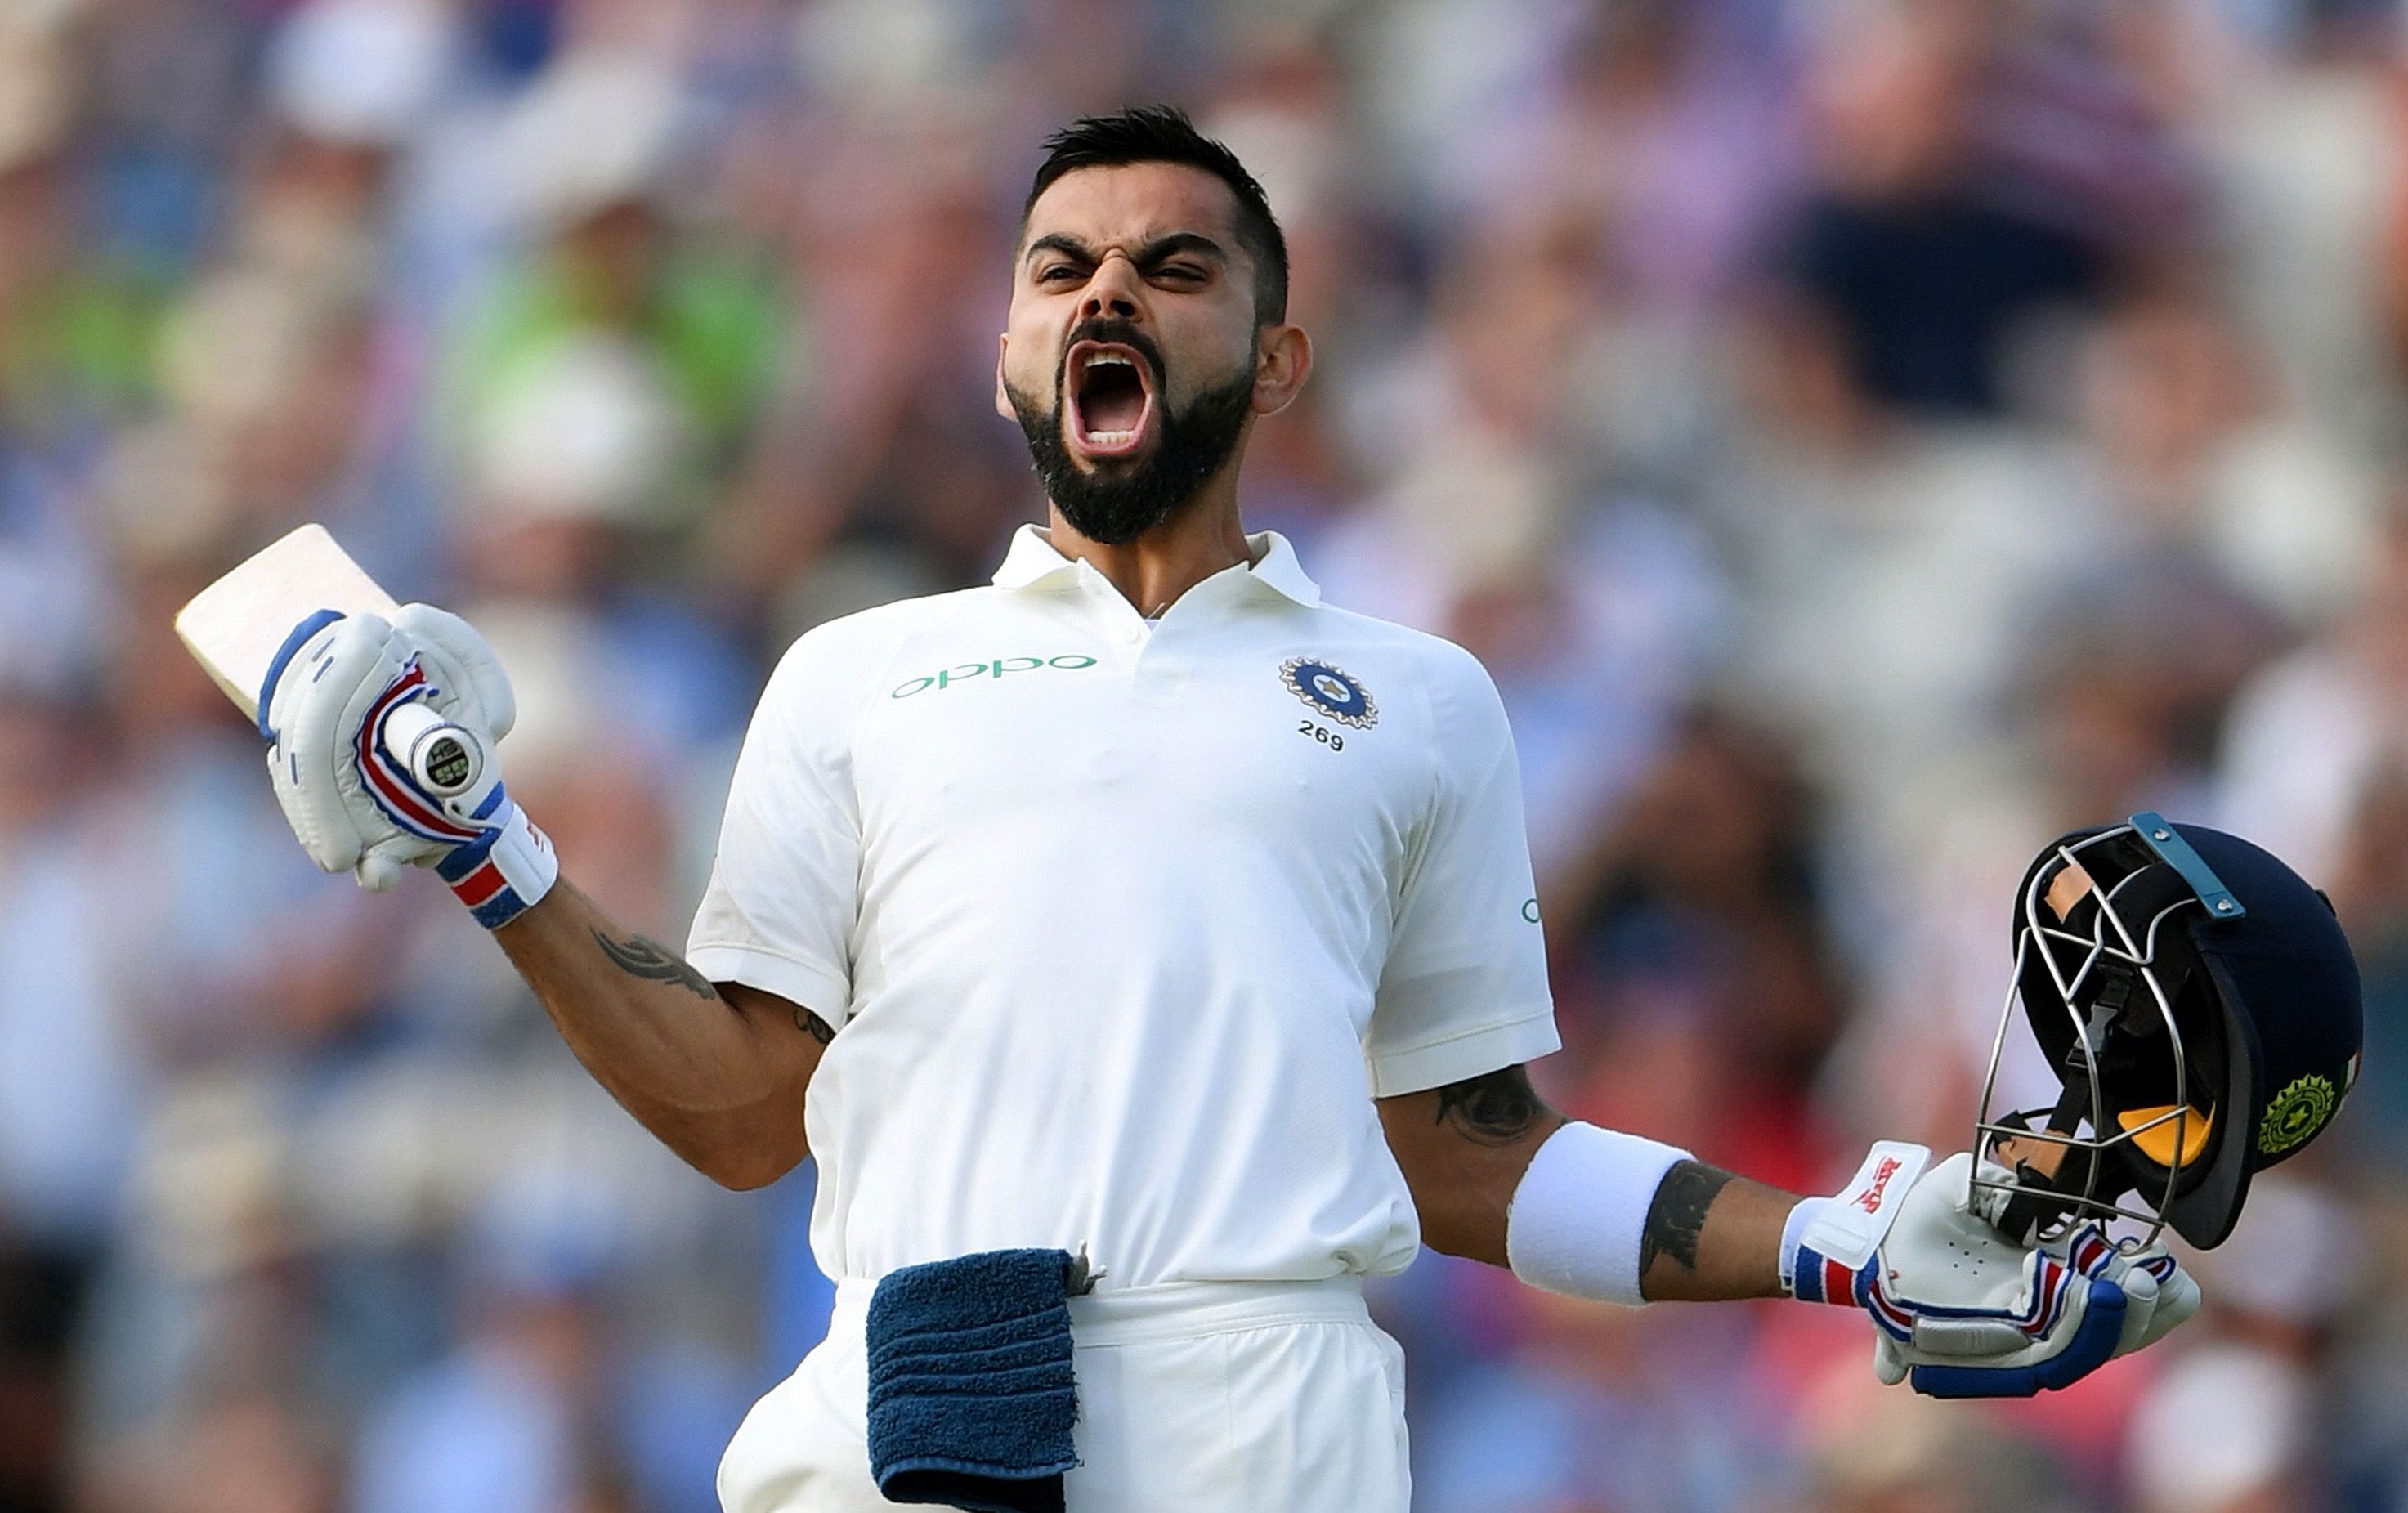 Virat Kohli screaming in triumph while in uniform and holding a cricket bat and helmet